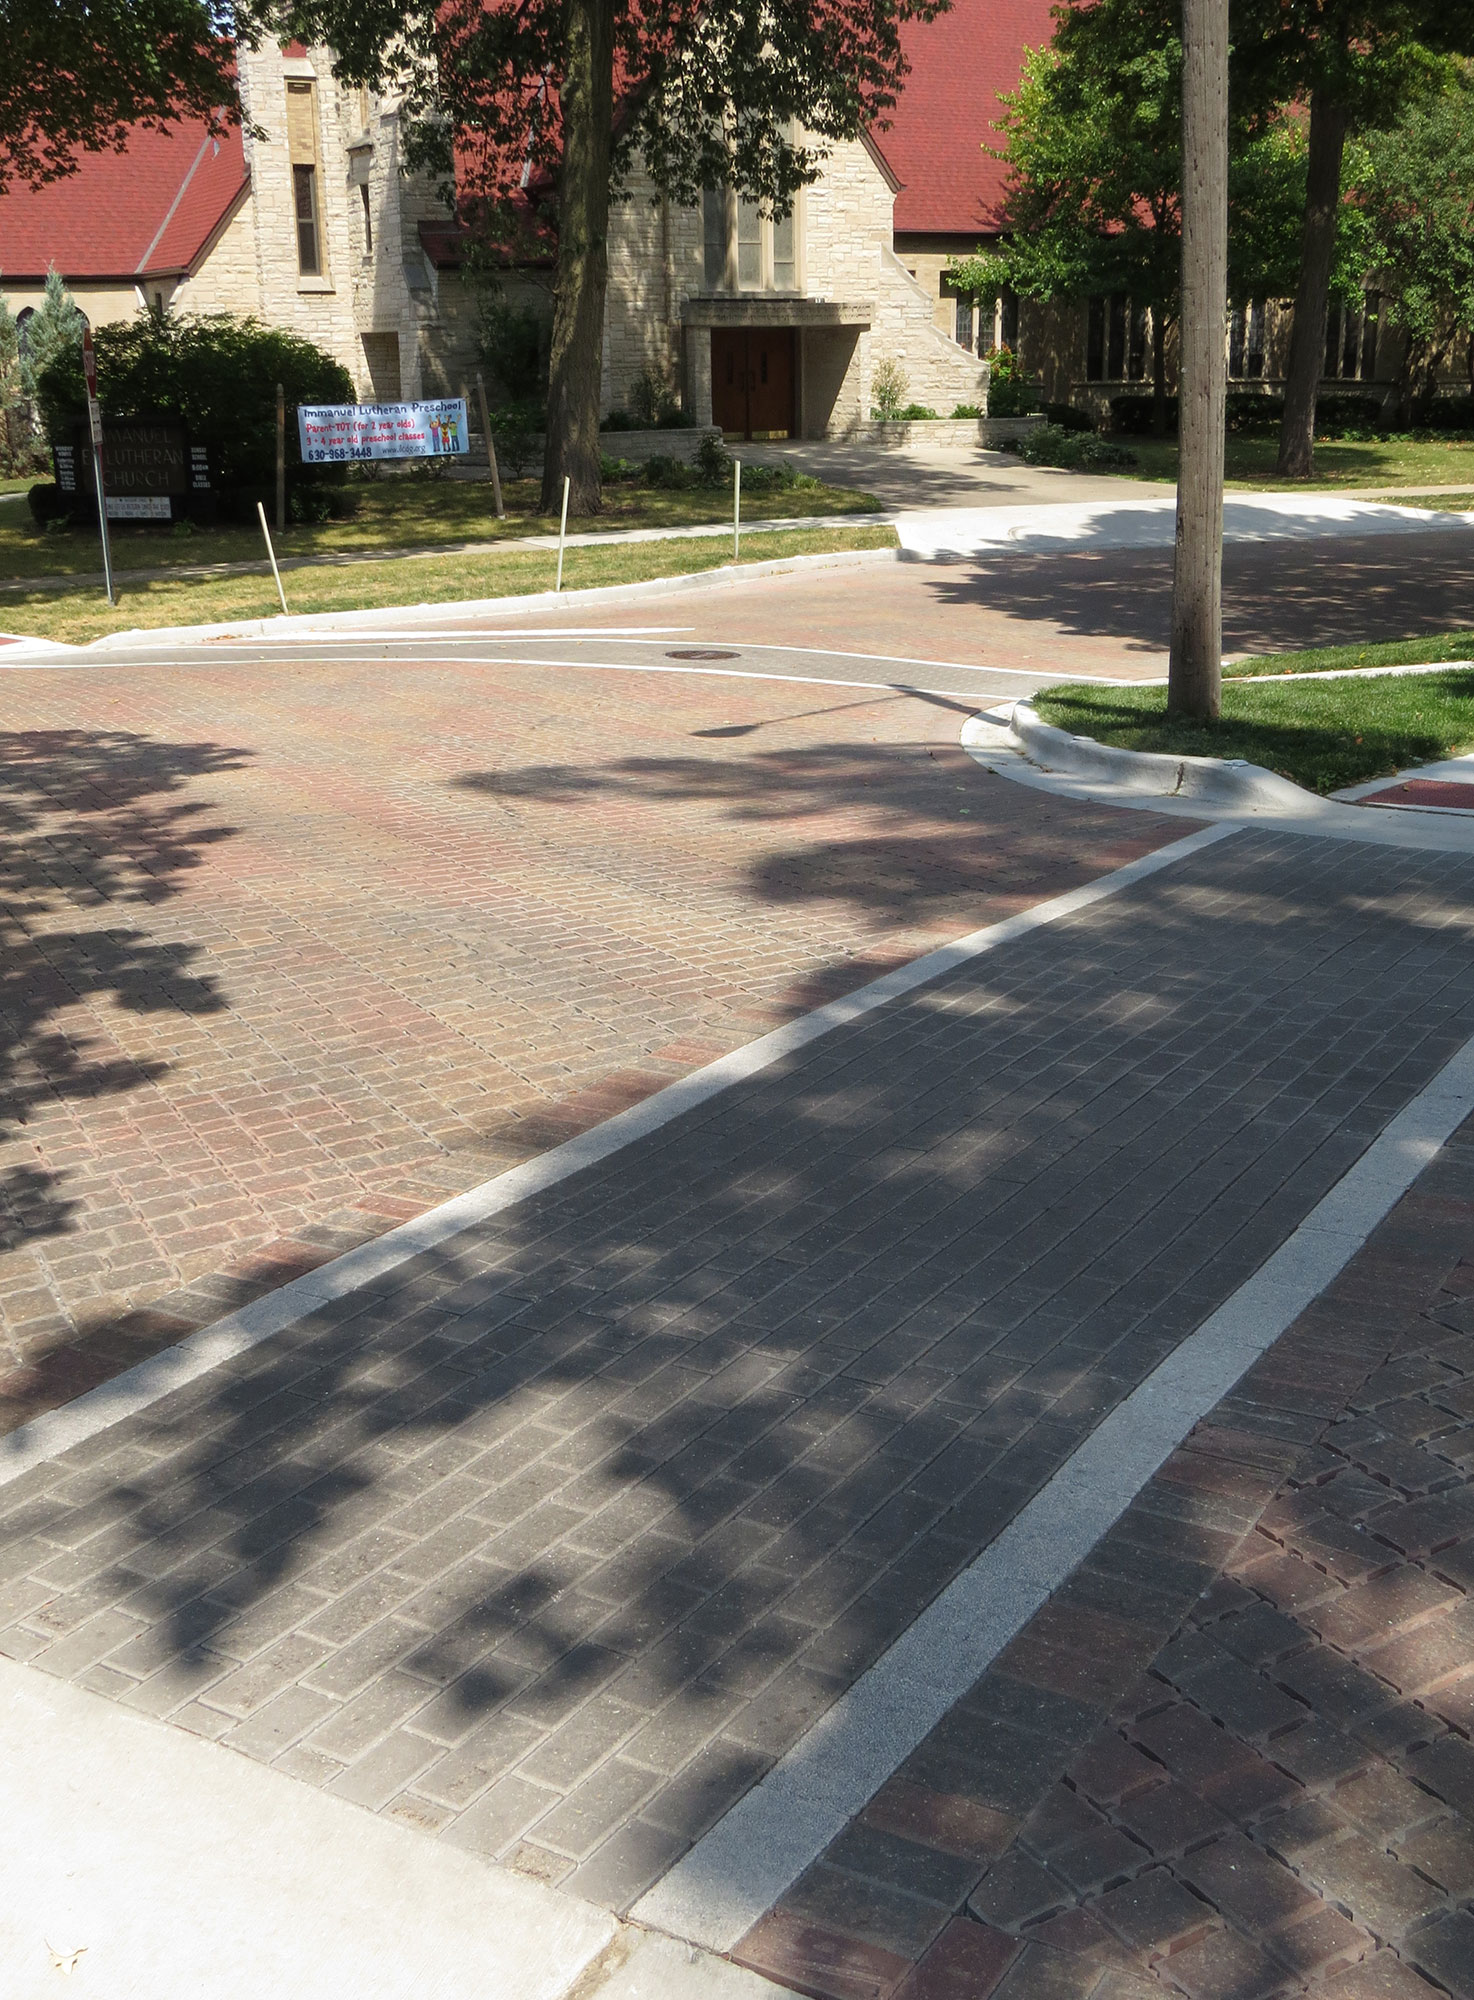 Grey Eco-Priora pavers form two distinct walkways, connecting intersecting street corners and disrupting a sea of red Eco-Optiloc.